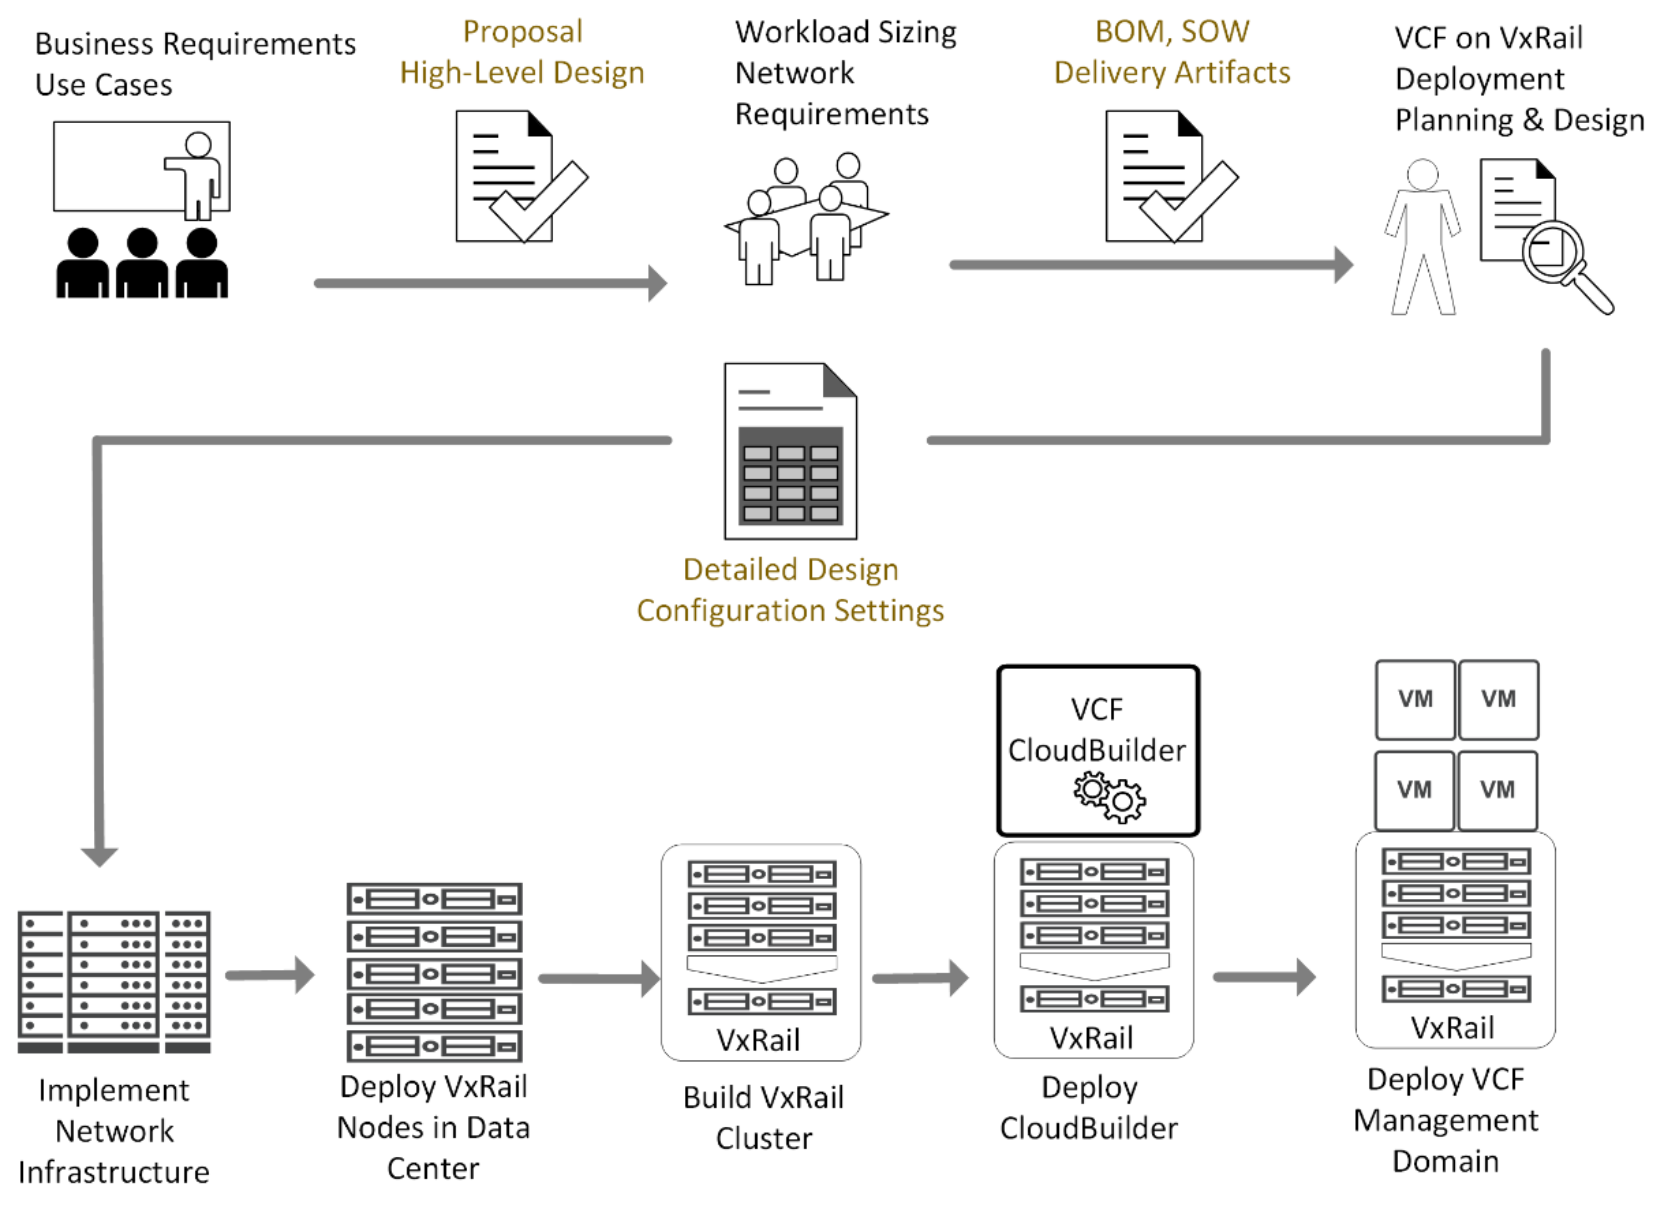 This figure shows the workflow from business requirements (use cases) to deploying a VCF management domain.